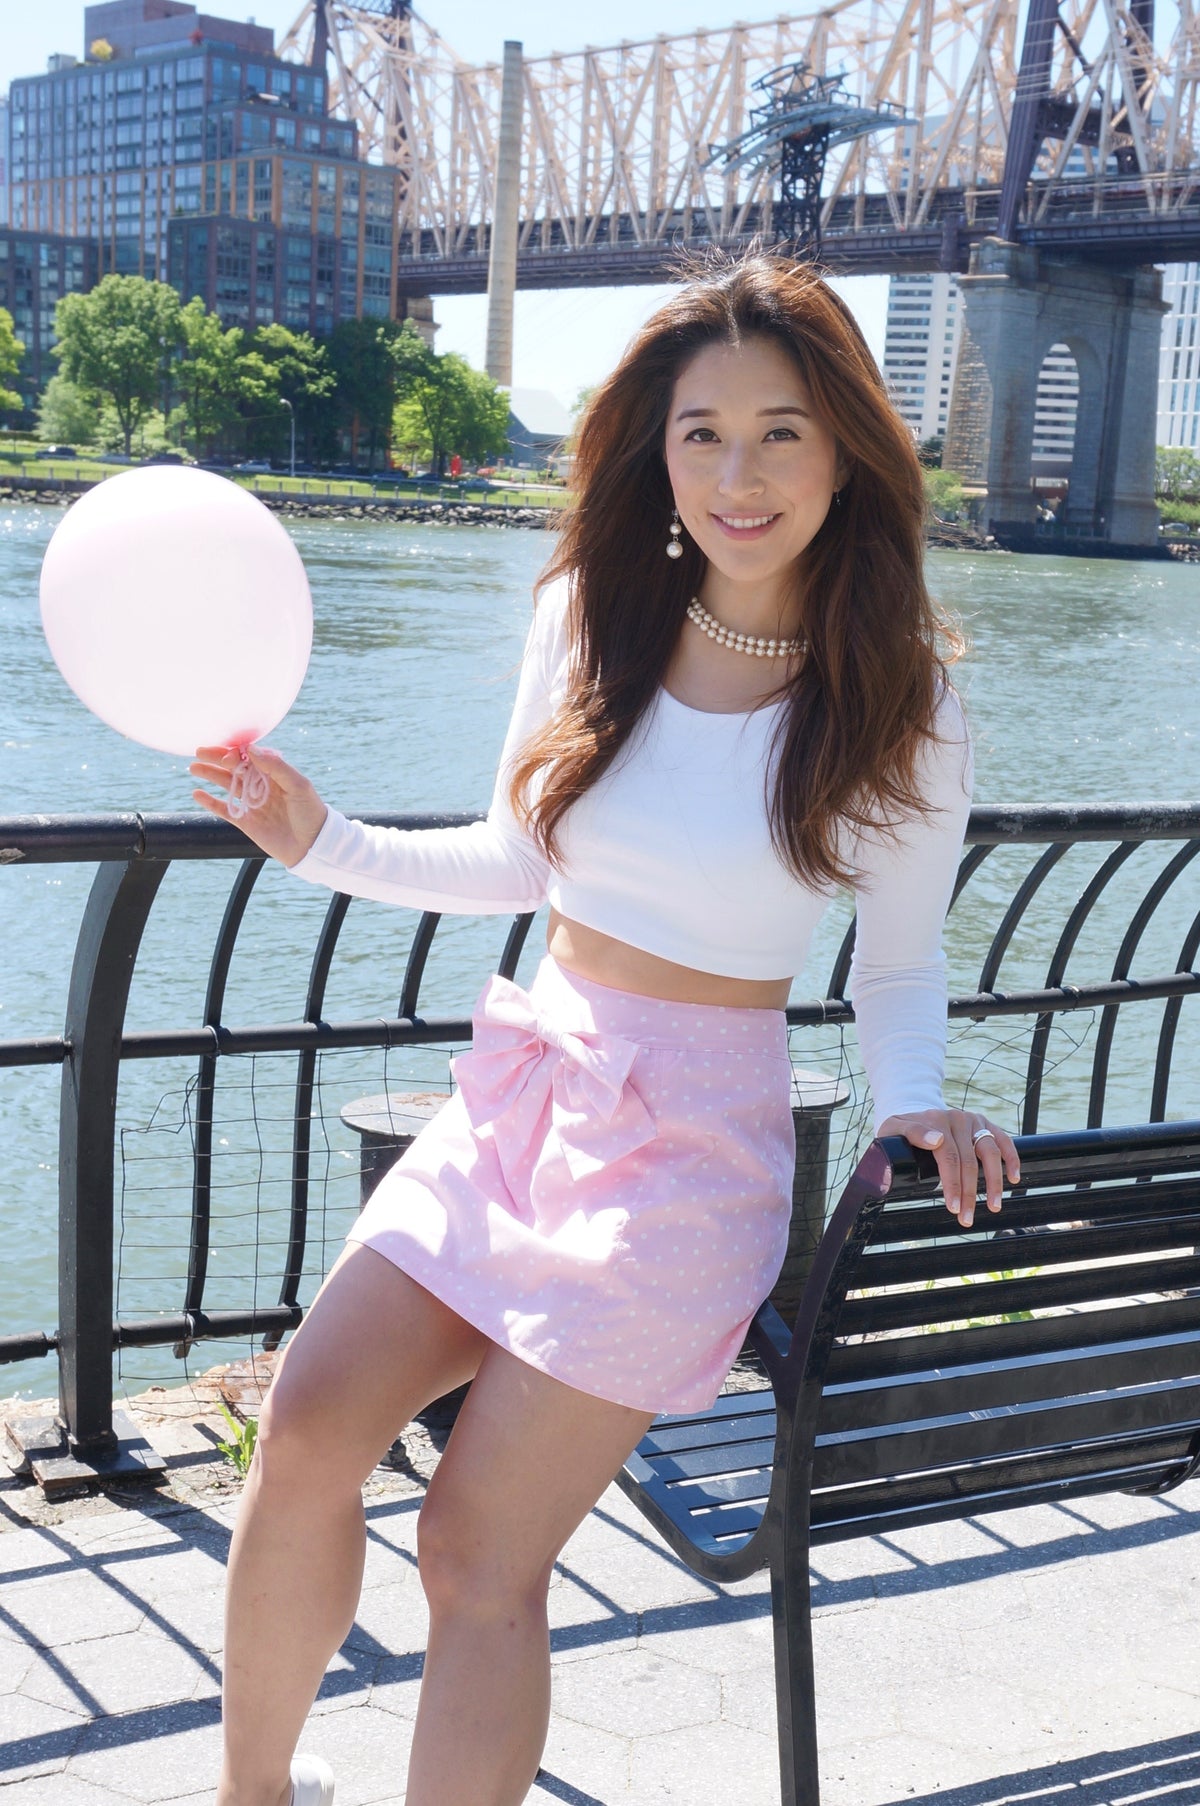 Model wearing a white long sleeve jersey knit crop top and a pink and white polka dot print skirt with front bow sitting on a bench holding a pink balloon smiling.